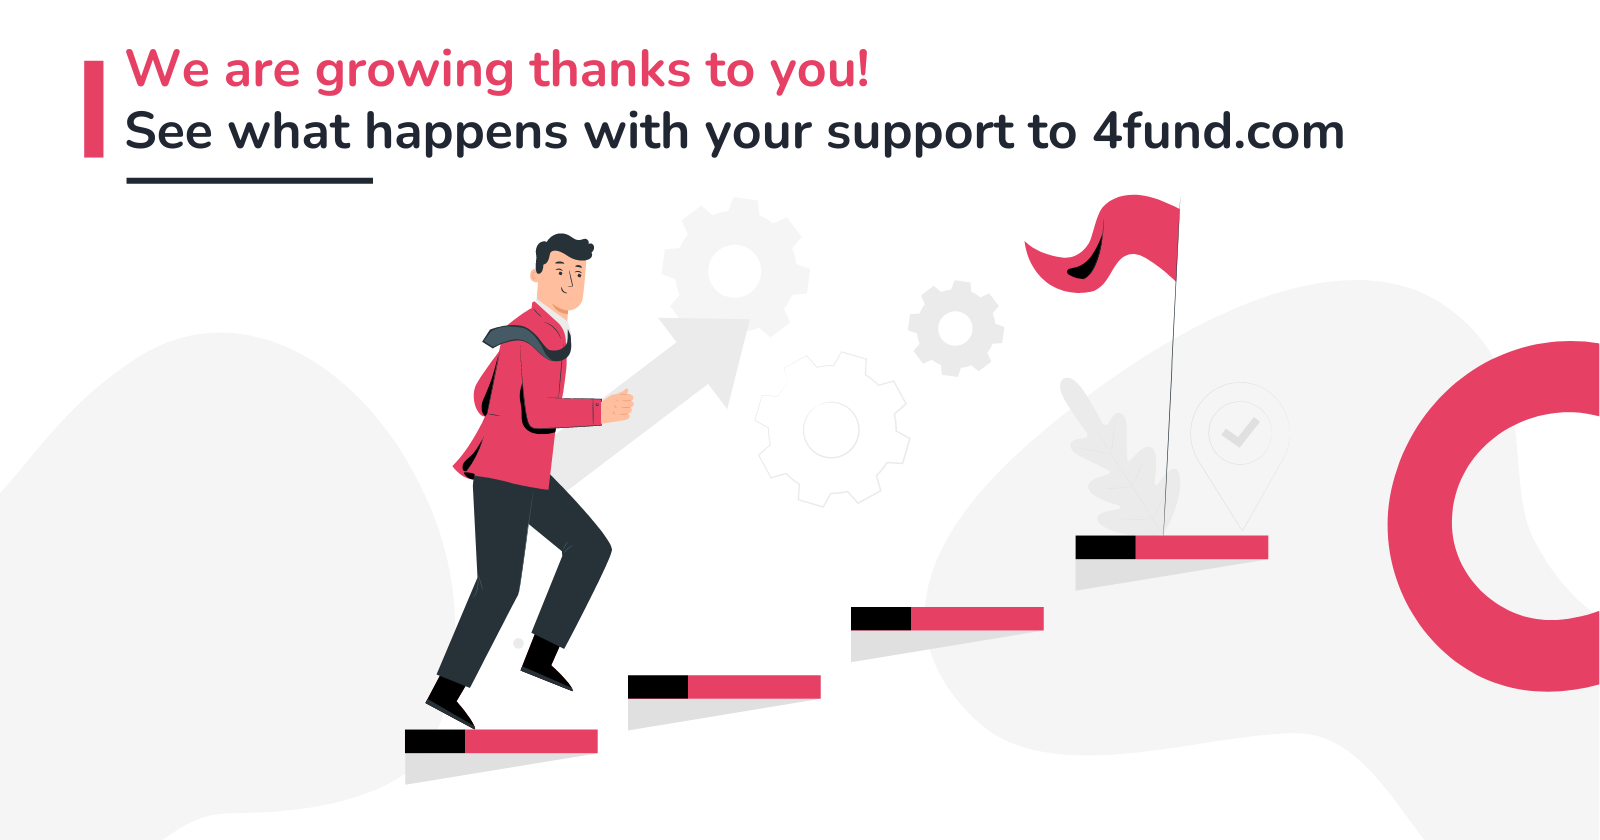 We are growing thanks to you! See what happens with your support to 4fund.com